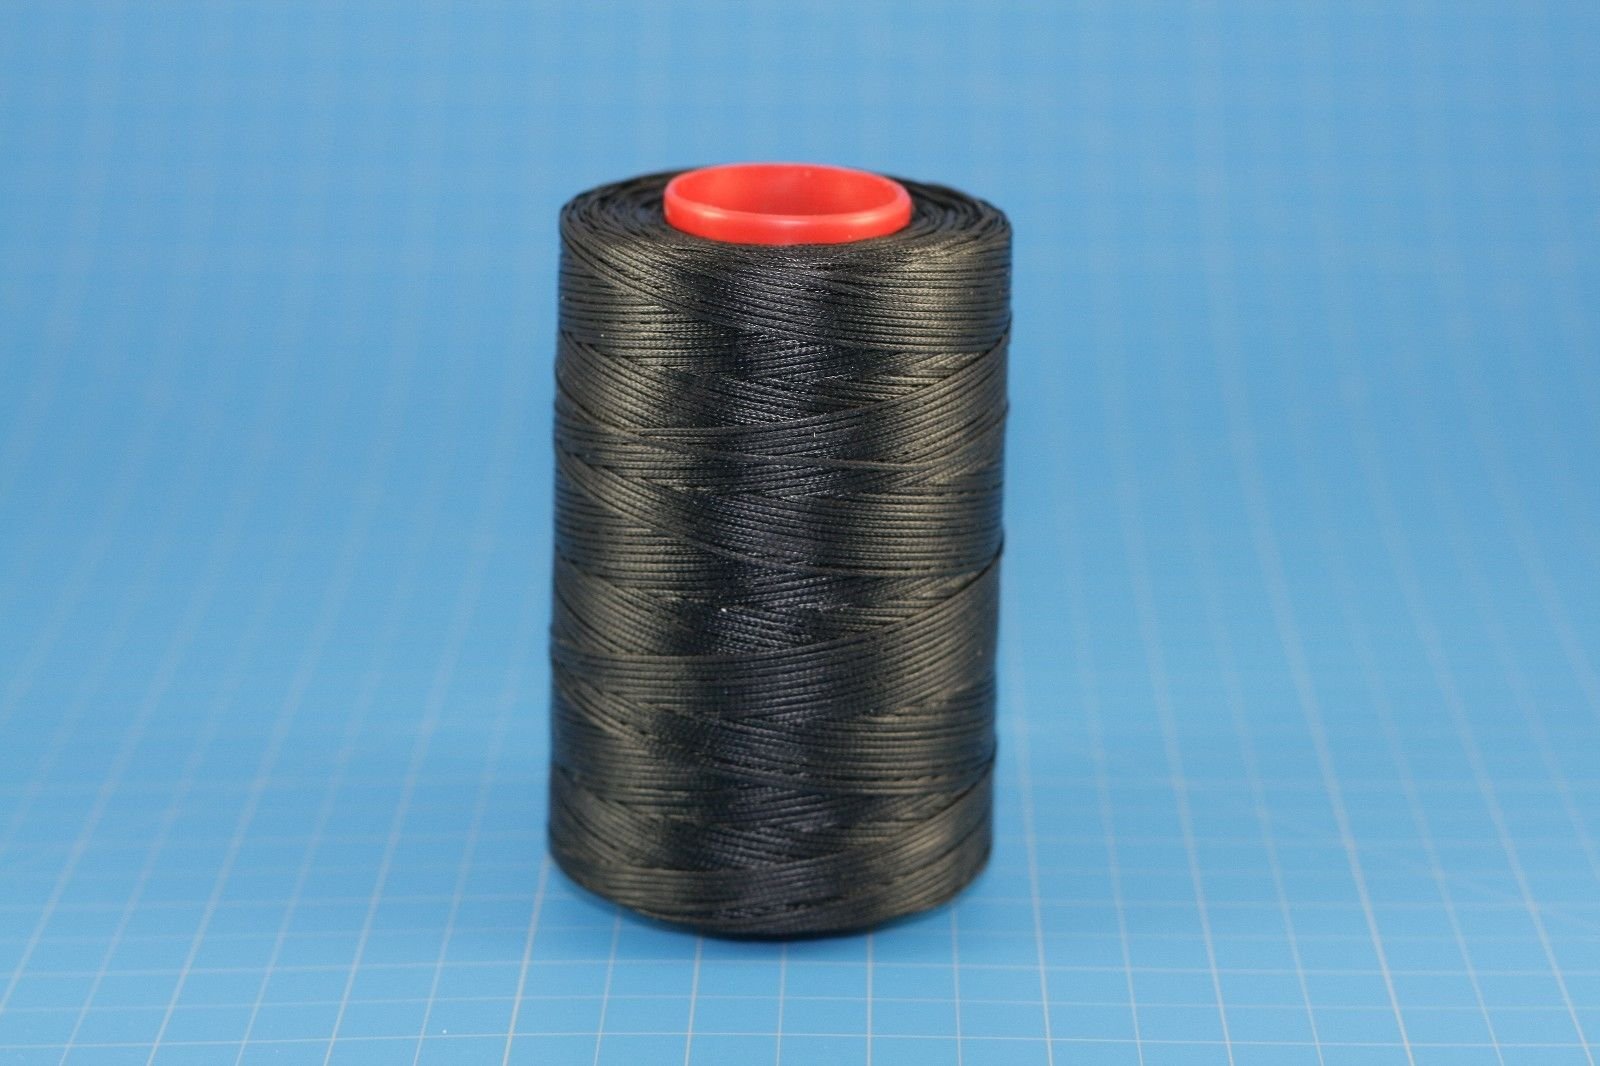 0.6mm Black Ritza 25 Tiger Wax Thread For Hand Sewing. 25 - 1000m length (125m)